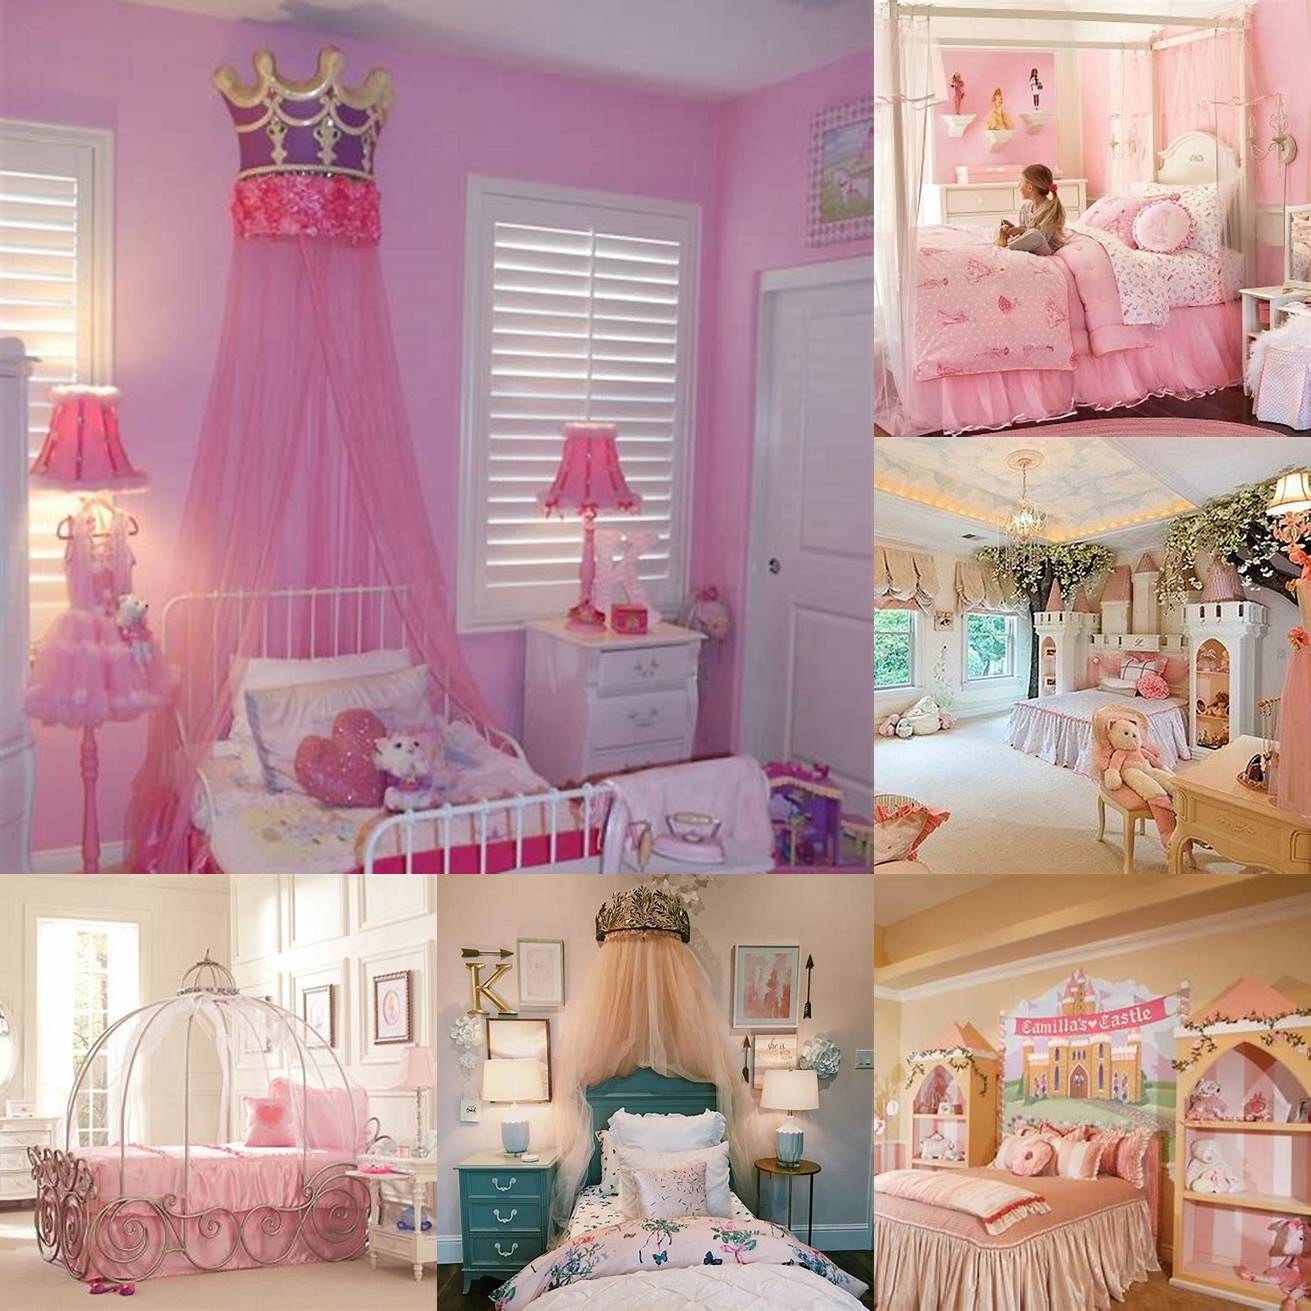 A princess-themed bedroom is perfect for girls who love fairy tales and princesses You can use a canopy bed and princess decor to create a magical and whimsical space